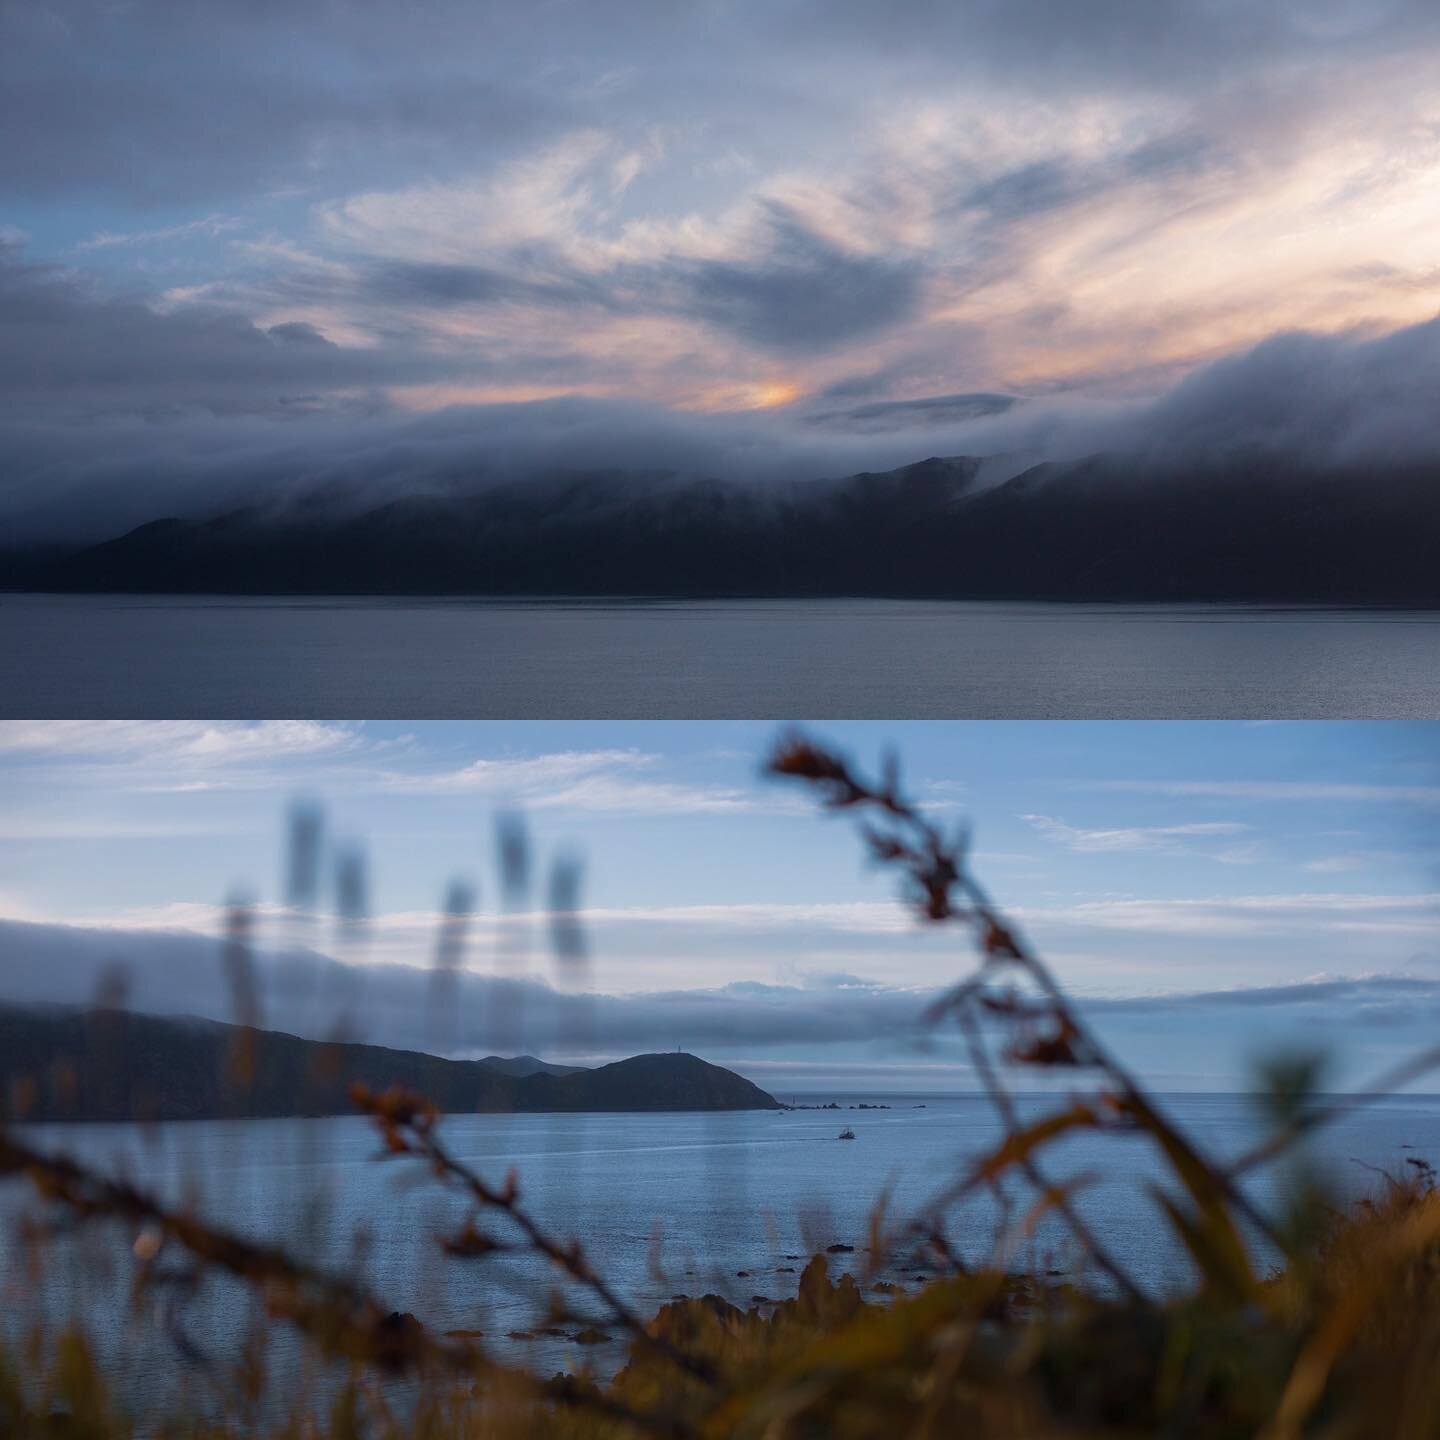 There&rsquo;s been some spectacular misty clouds the last few days!

#wellington #seatoun #dawn